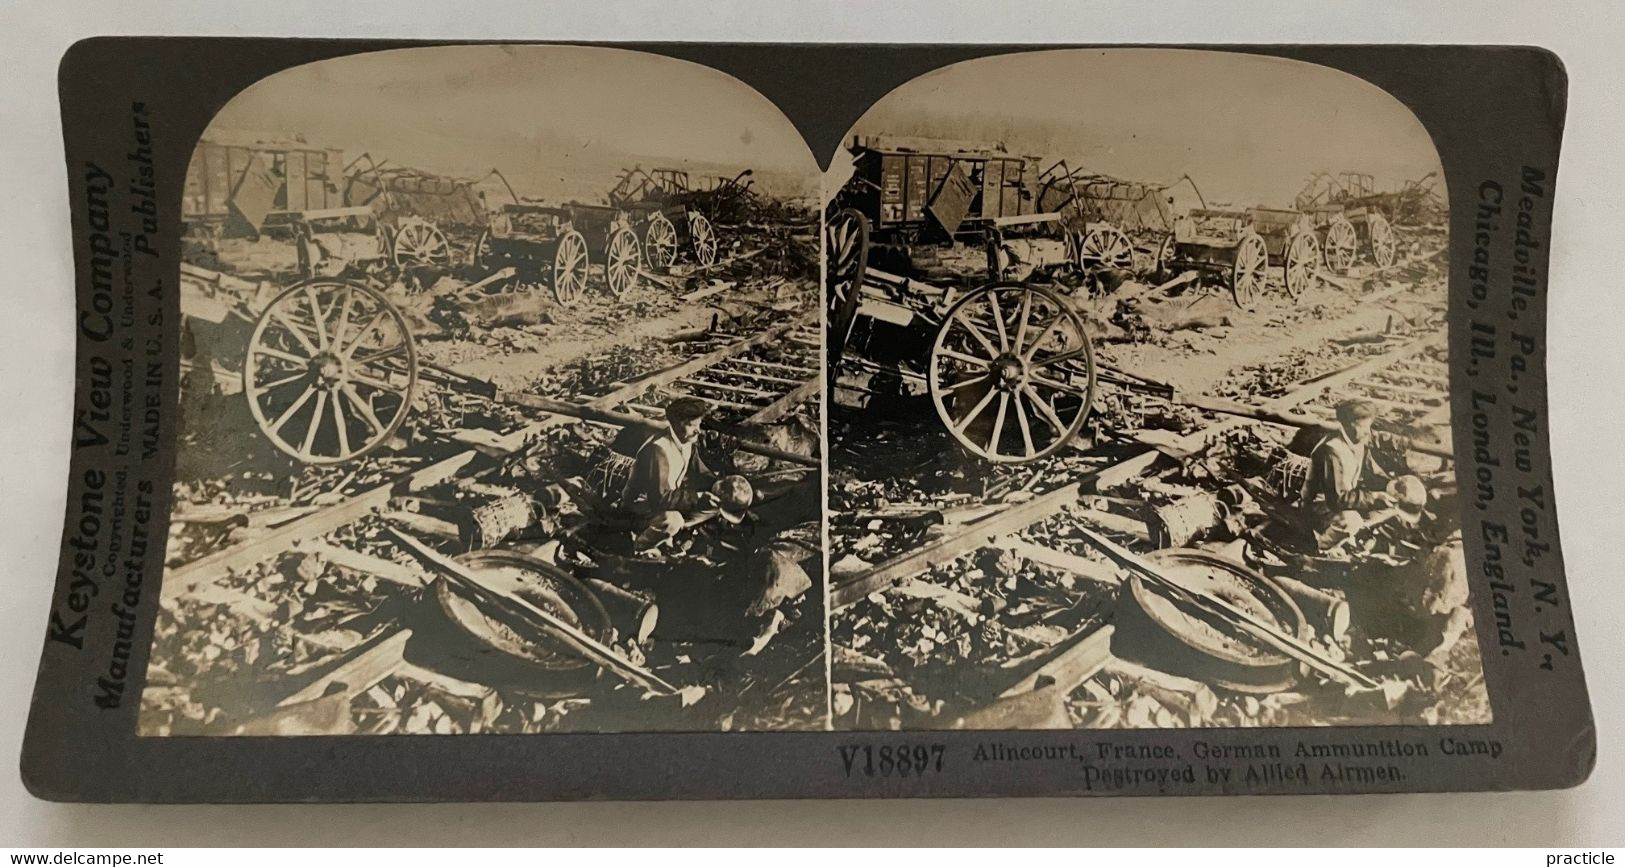 2020 Alincourt France German Ammunition Camp Destroyed By Allied Airmen Keystone Stereo Photo - Visionneuses Stéréoscopiques